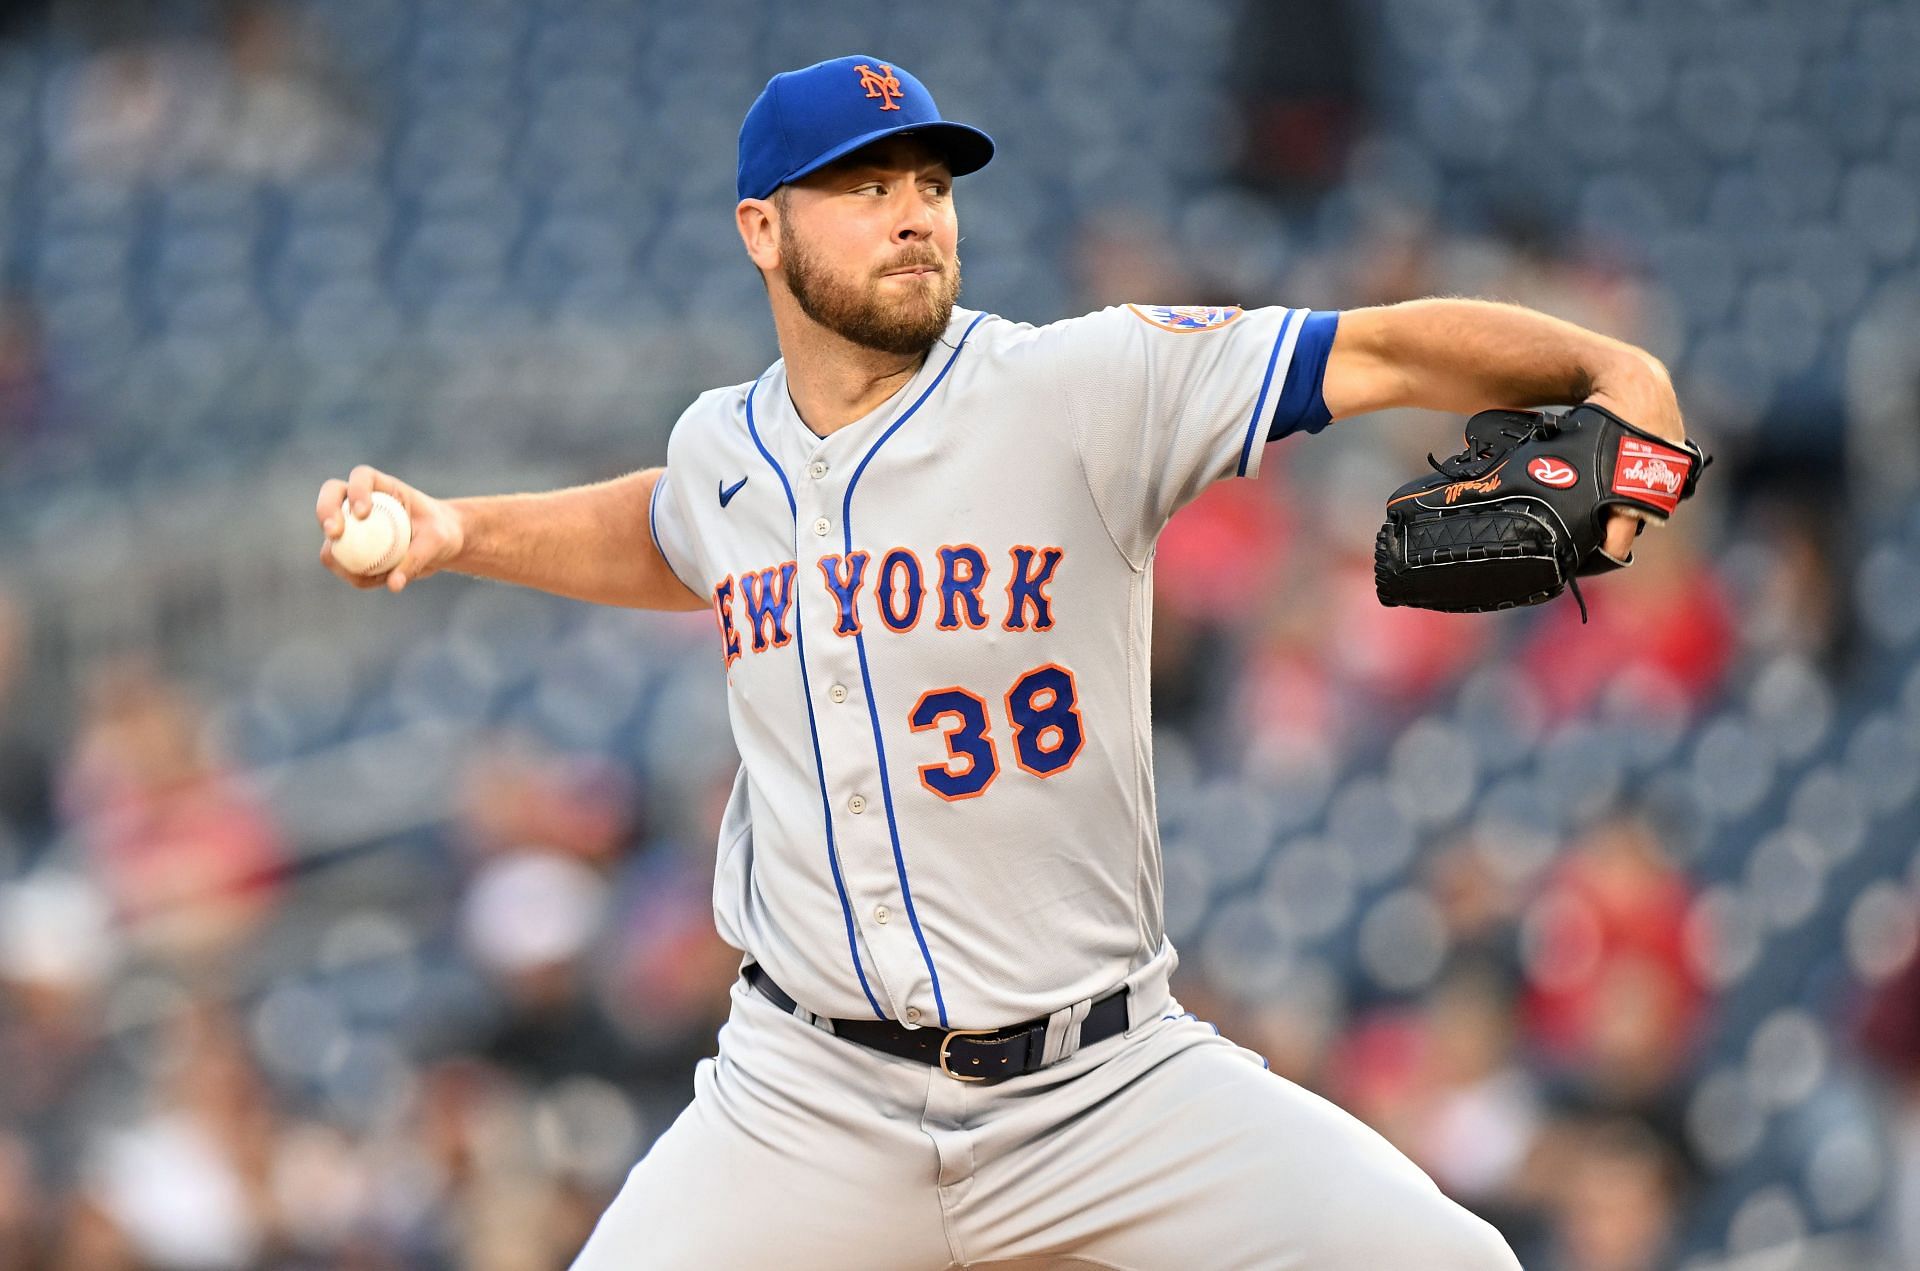 Going into today&#039;s game, New York Mets starting pitcher Tylor Megill had struck out 41 batters over 38 innings